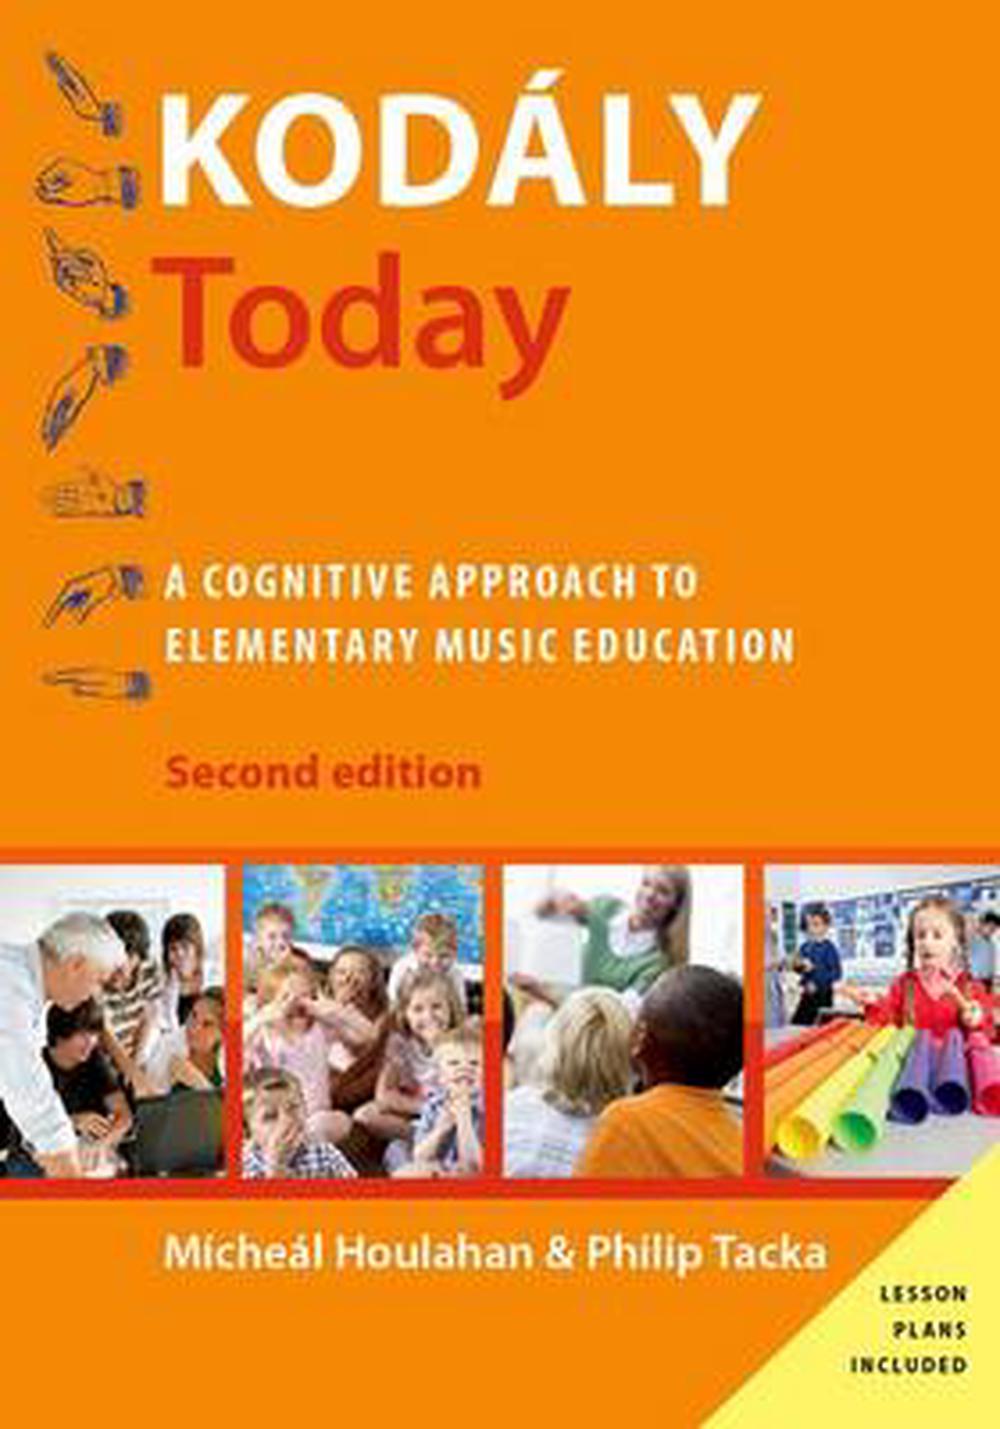 Kodaly Today A Cognitive Approach to Elementary Music Education by Micheal Houl 9780190235772